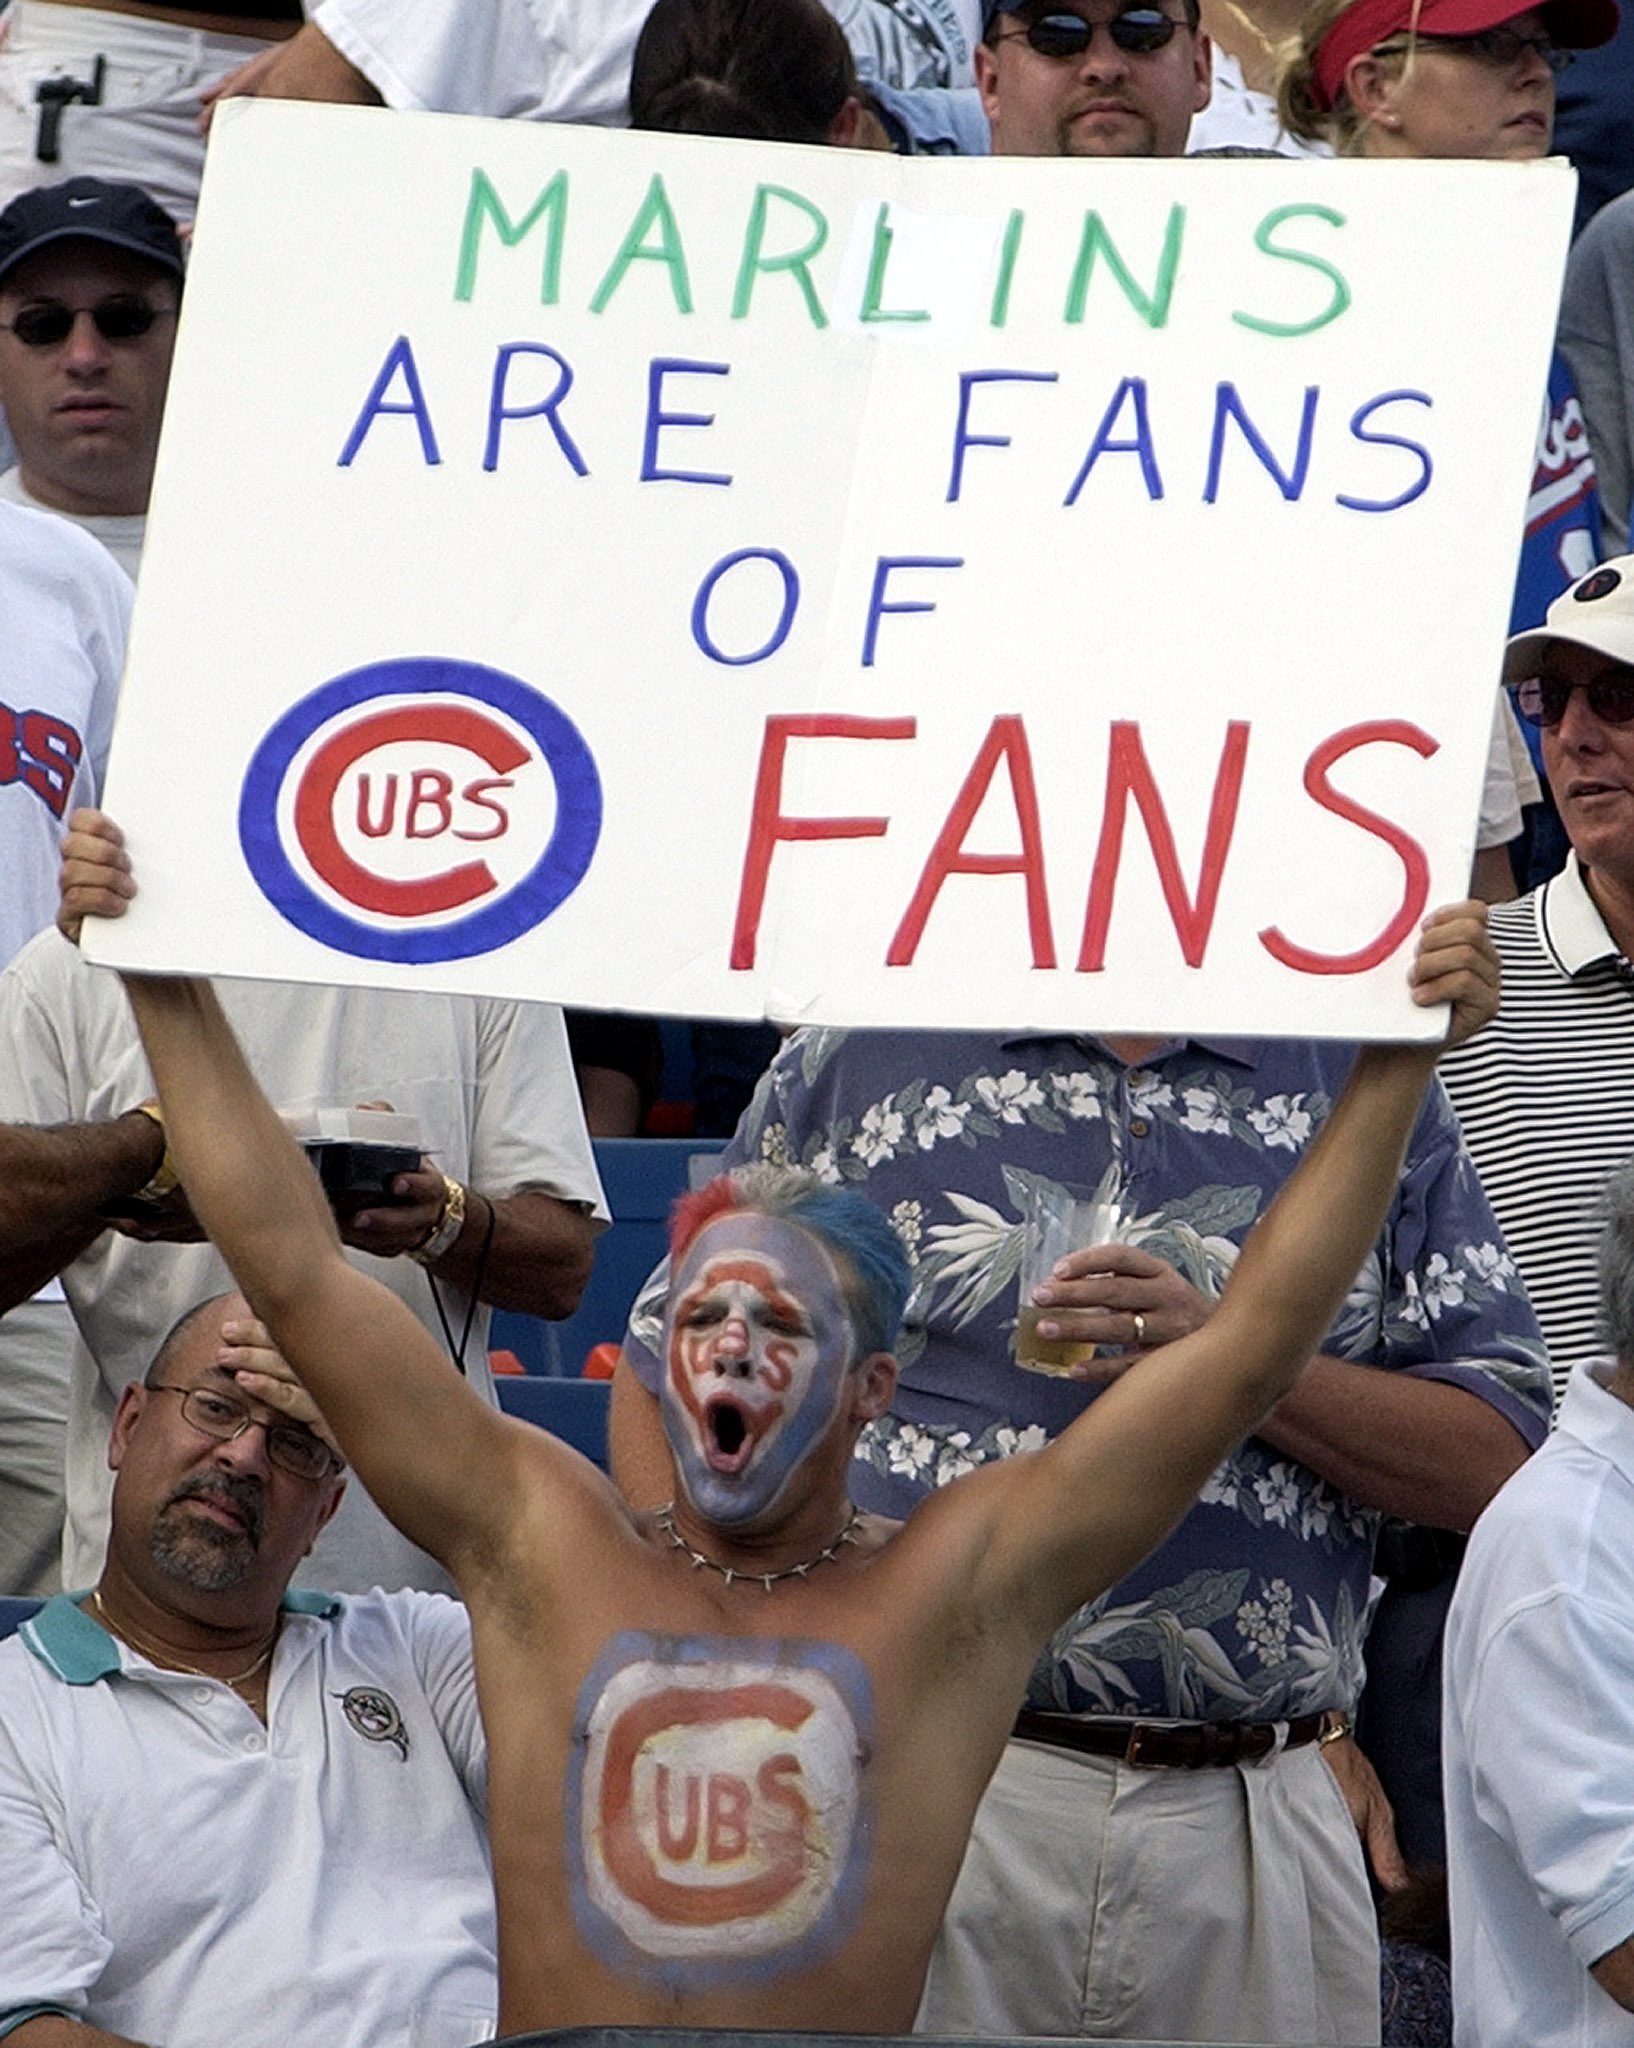 Mandatory Credit: Photo by Rhona Wise/EPA/Shutterstock (7912107a) A Chicago Cubs Fan Shows His Feelings with a Sign and Body Paint During Game Five of the National League Championship Series Against the Florida Marlins Sunday 12 October 2003 at Pro Player Stadium in Miami Florida Usa Baseball Cubs Marlins Fan Support - Oct 2003